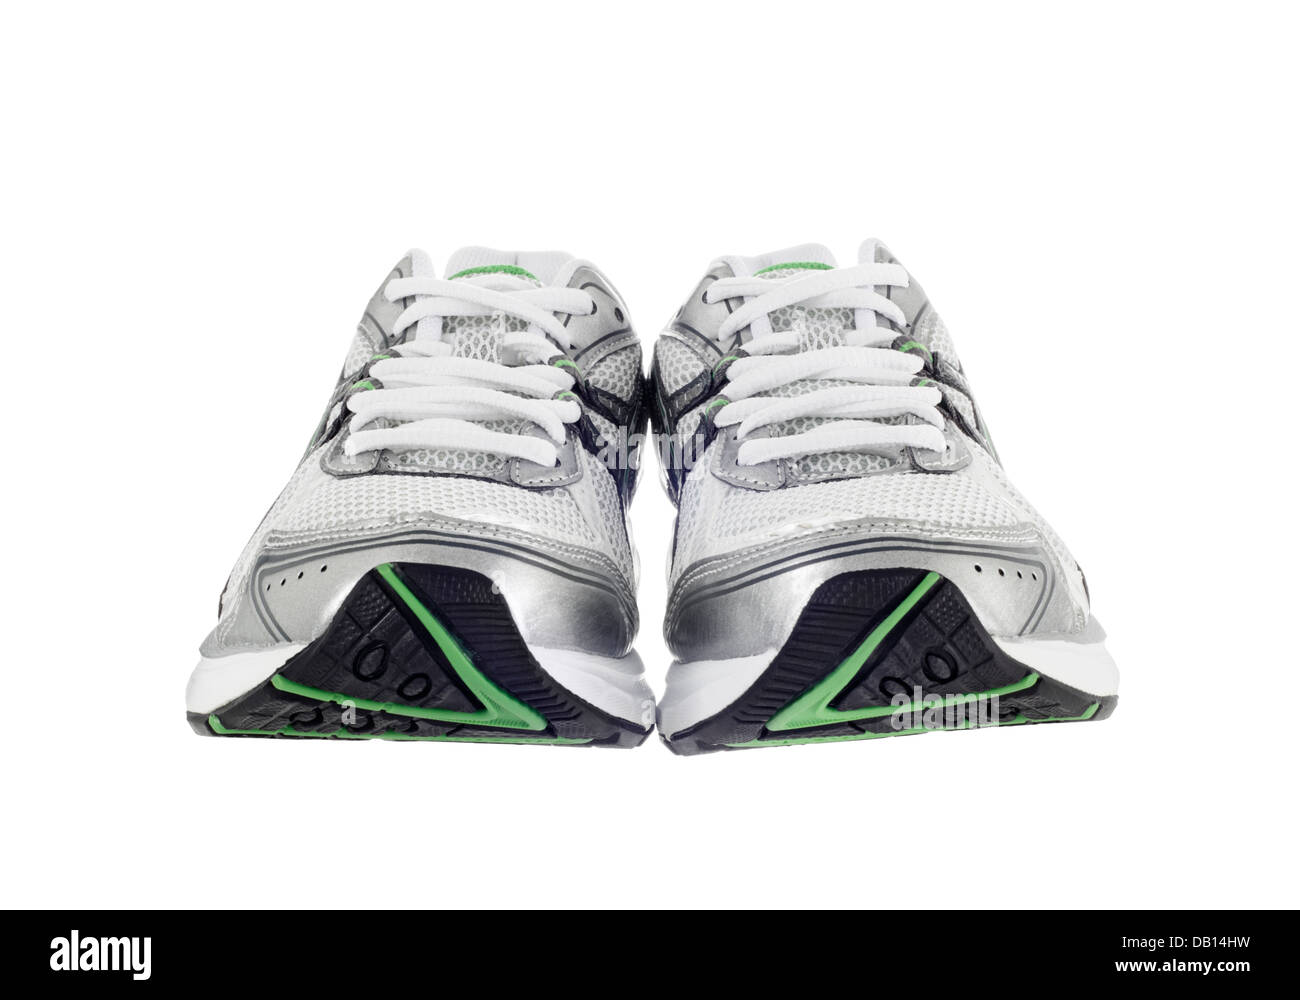 Pair of running shoes Stock Photo